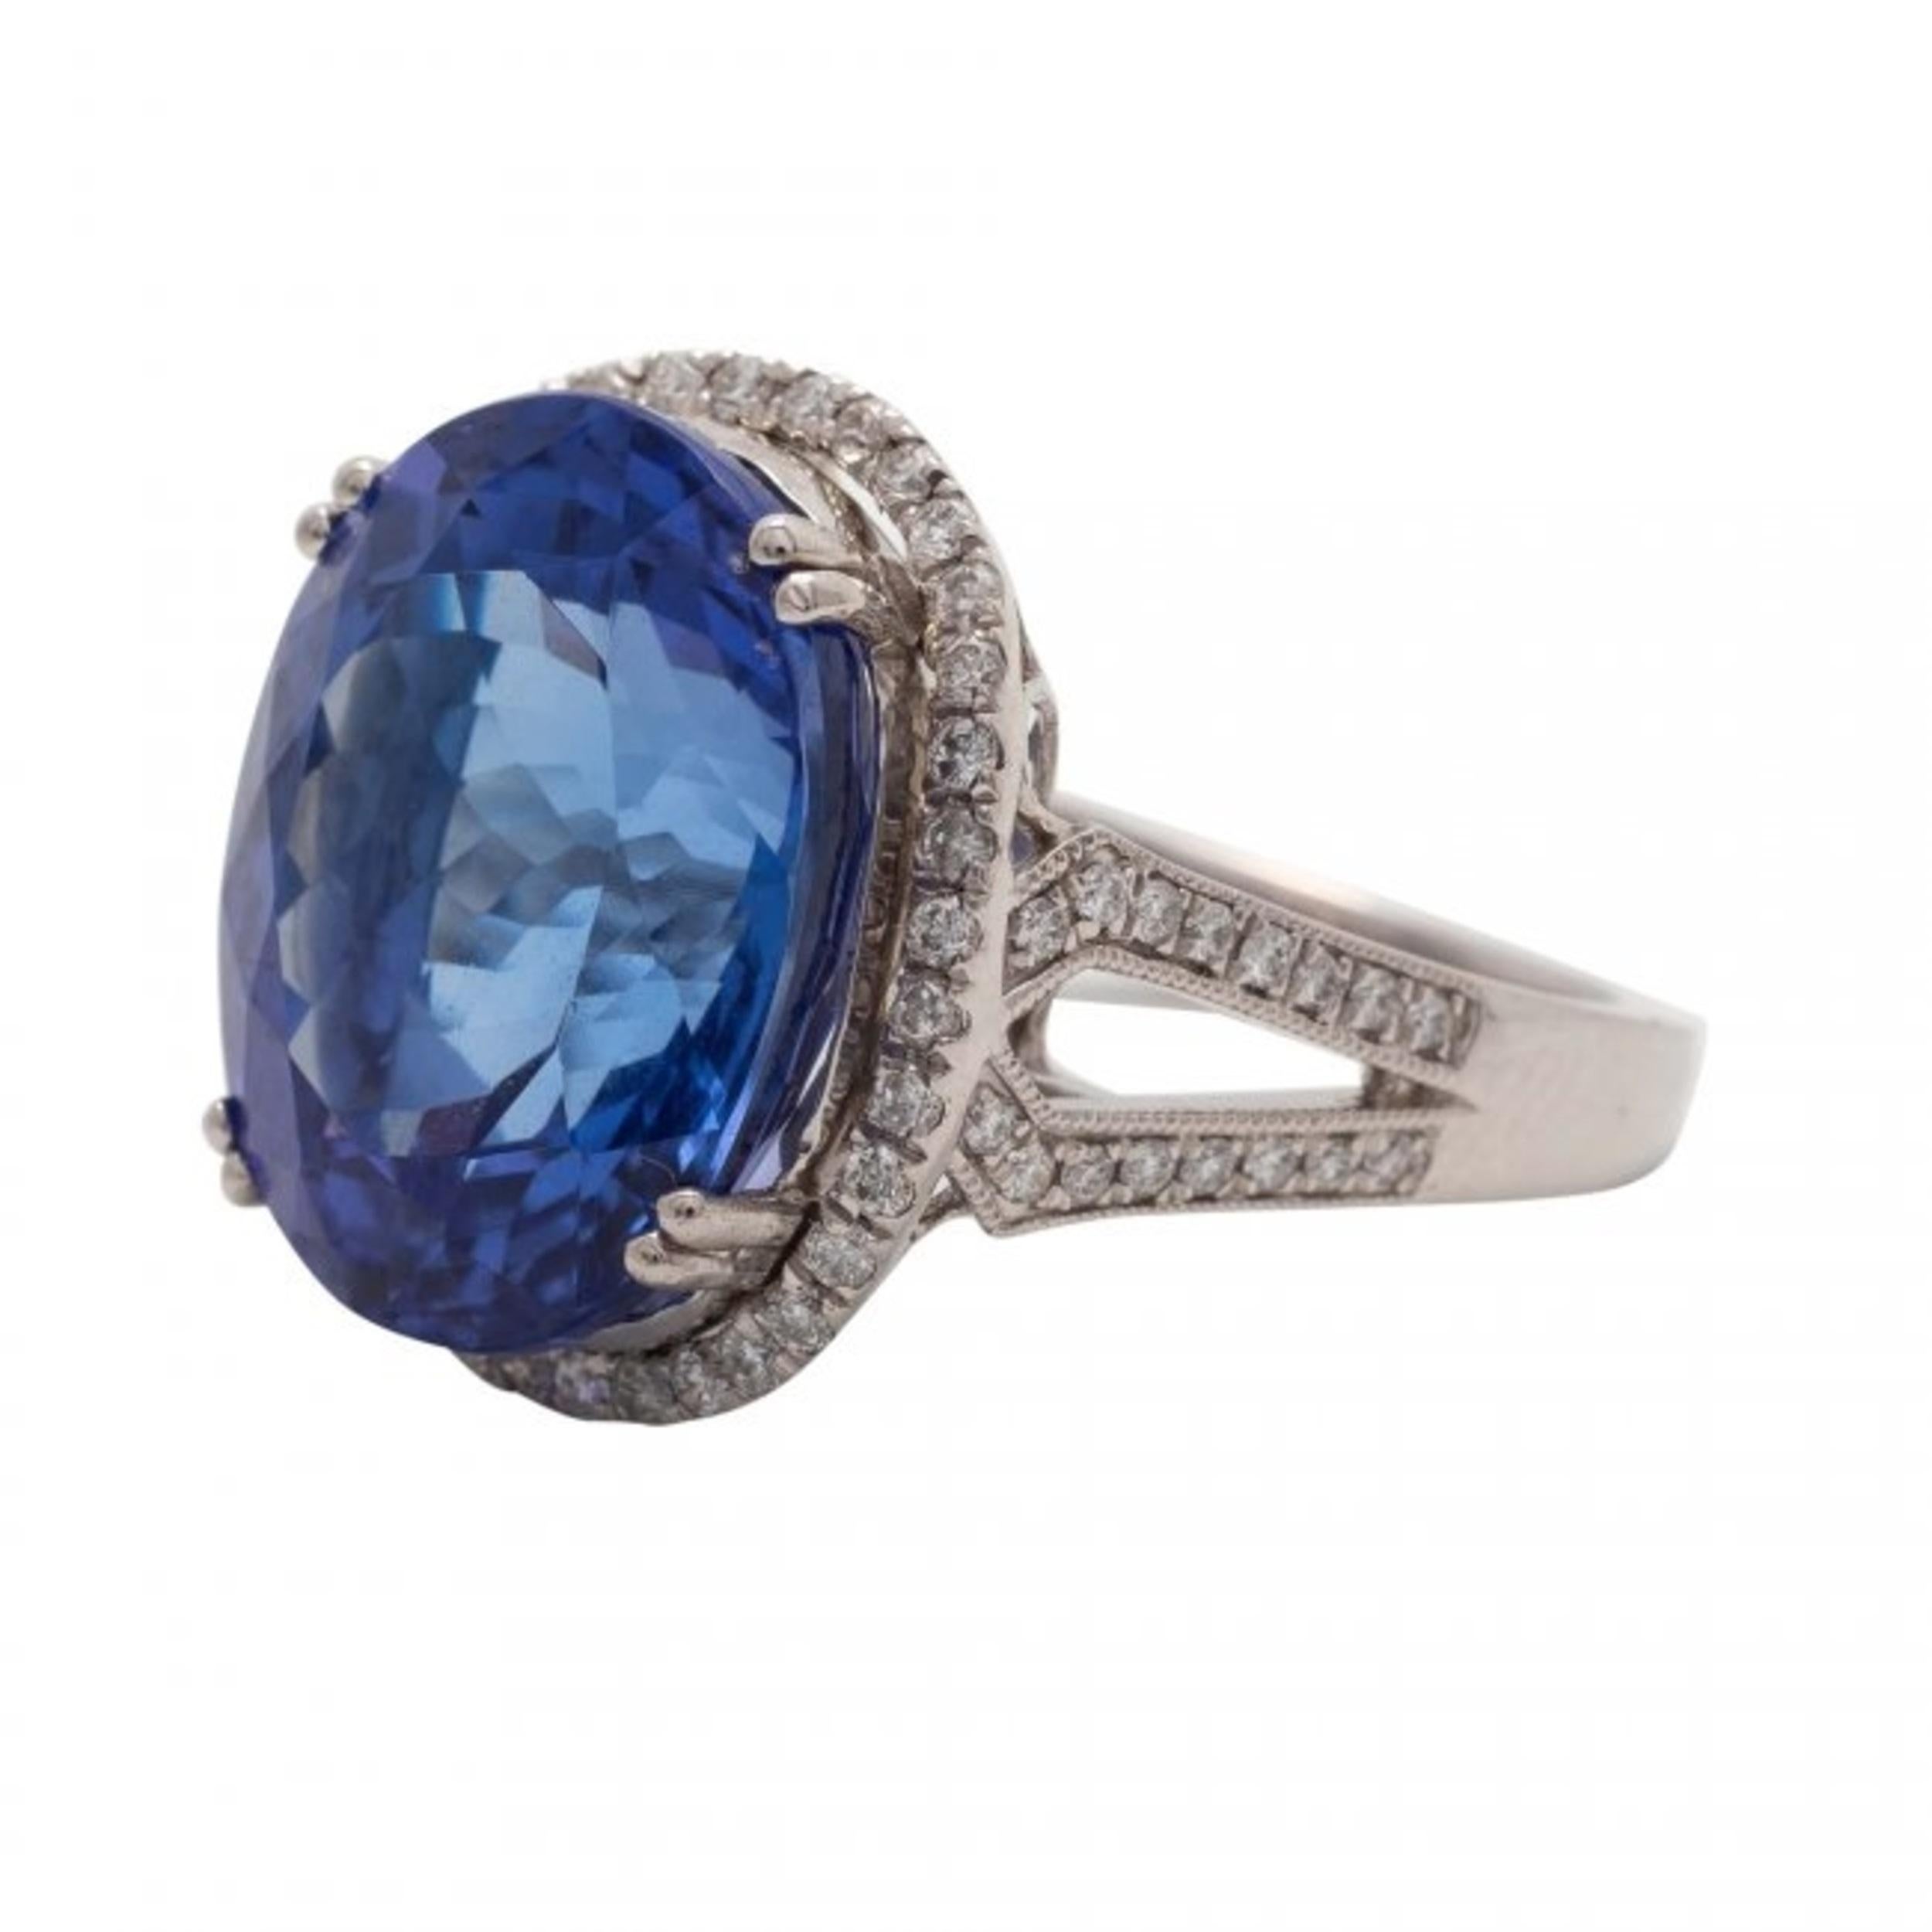 
Tanzanite and Diamond Ring 
centered by a oval faceted tanzanite weighing approximately 11.56 carats, within a pavé-set frame of round diamonds, weighing approximately .48 carats, mounted in 18 kt white gold 
11.55 grams (gross), size 6 1/2